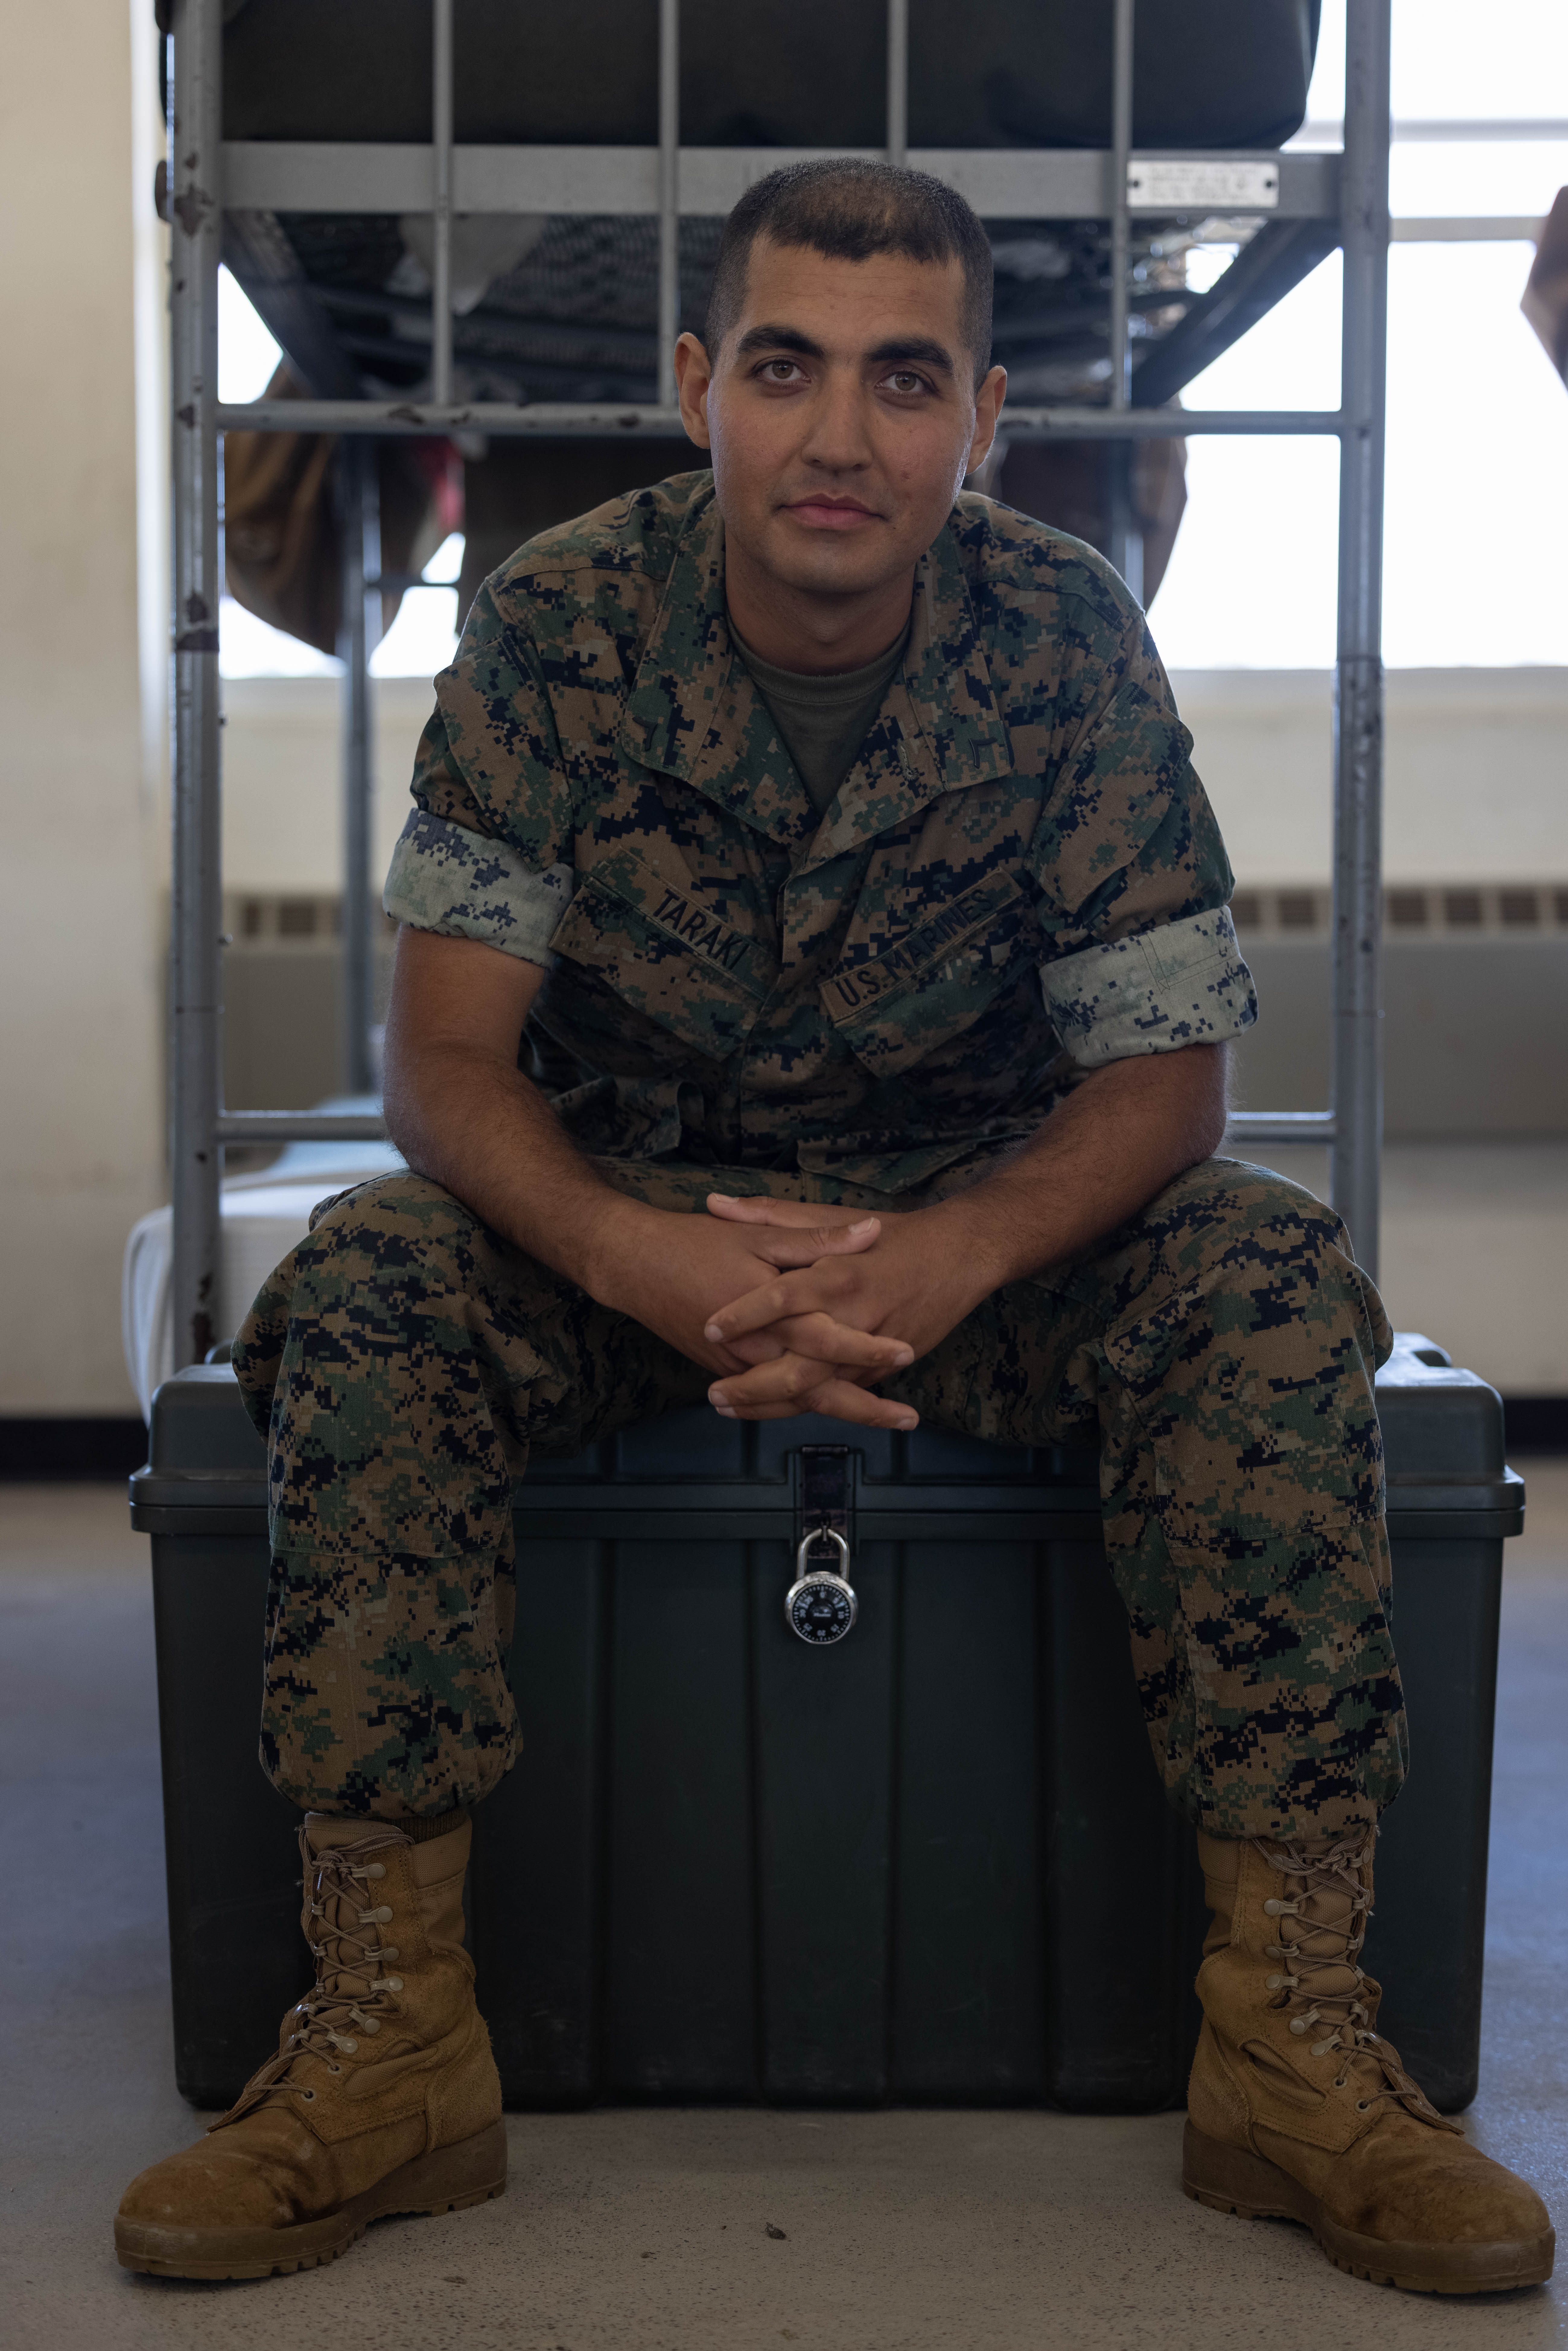 Former Afghan interpreter graduates from boot camp to become a Marine